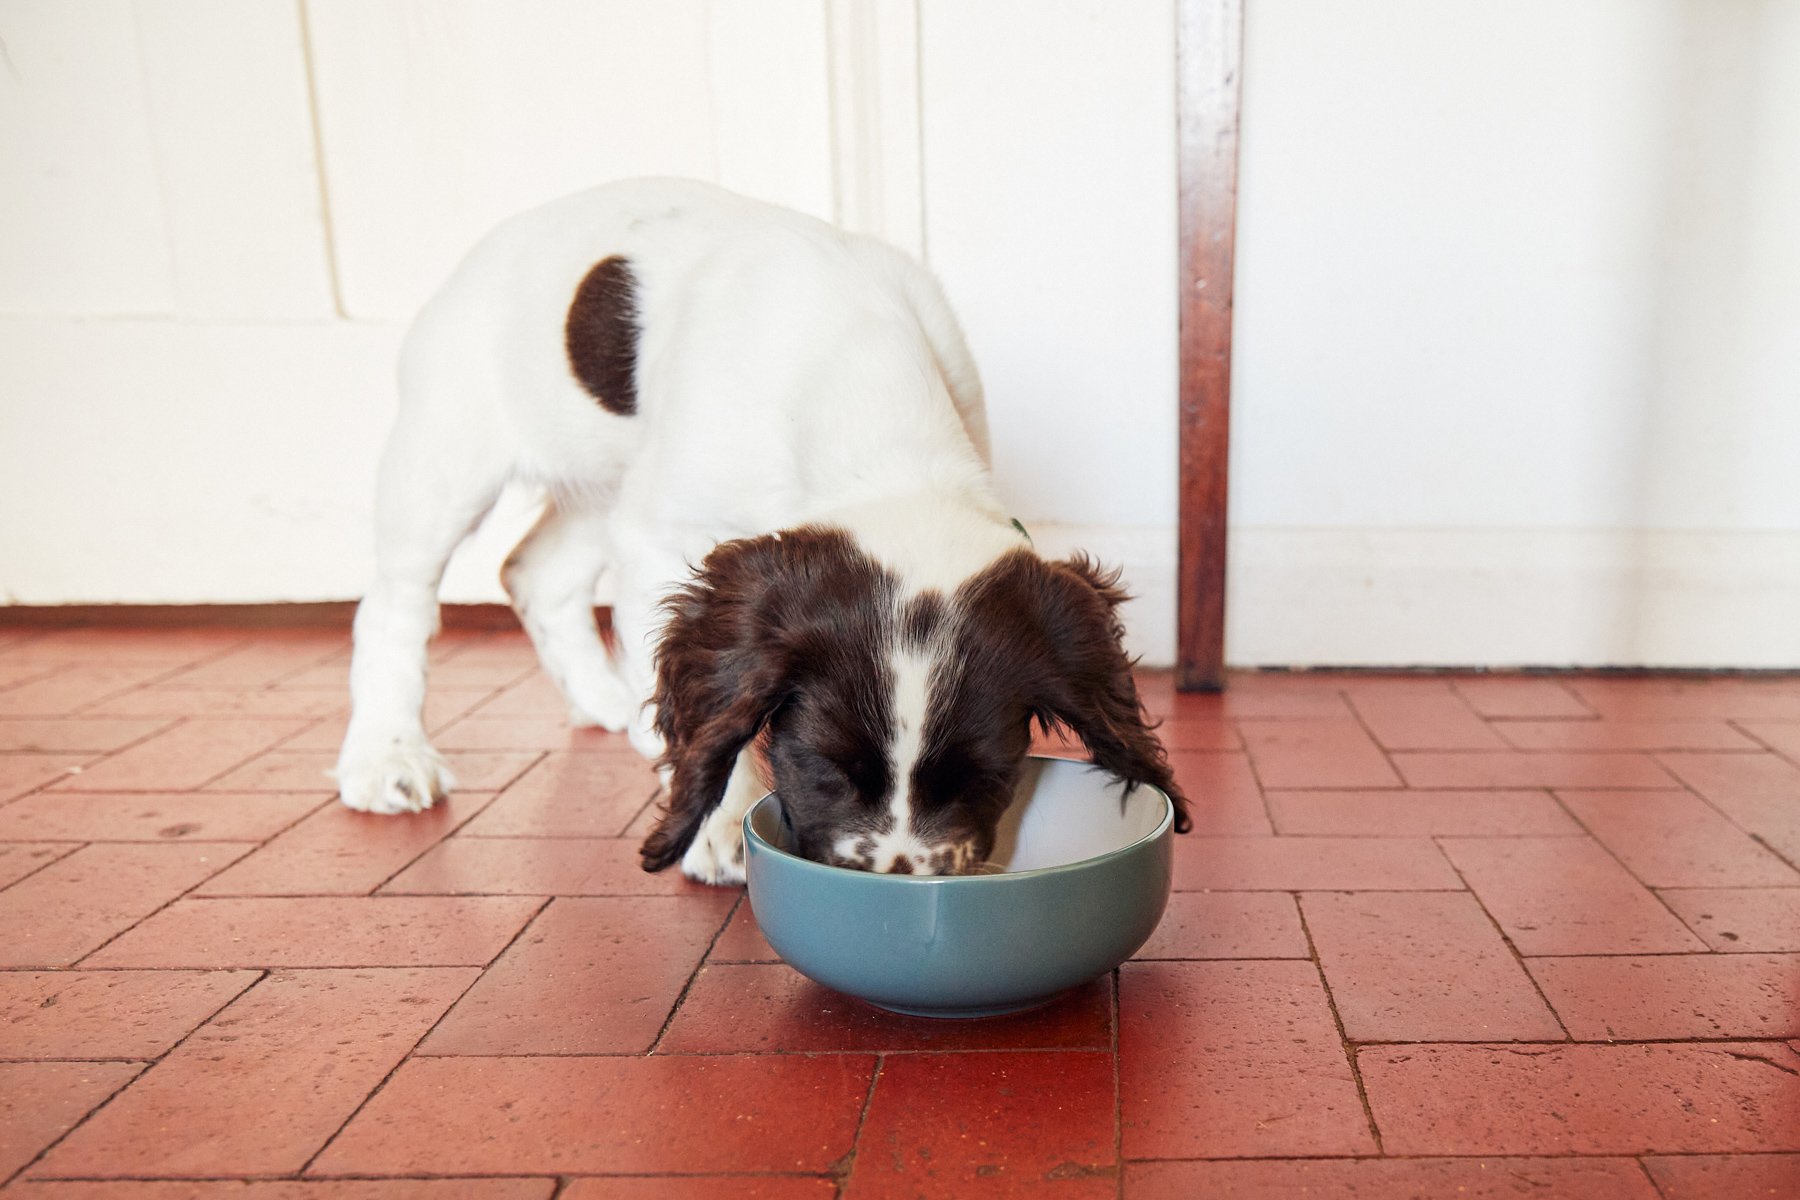 A puppy eating from their bowl